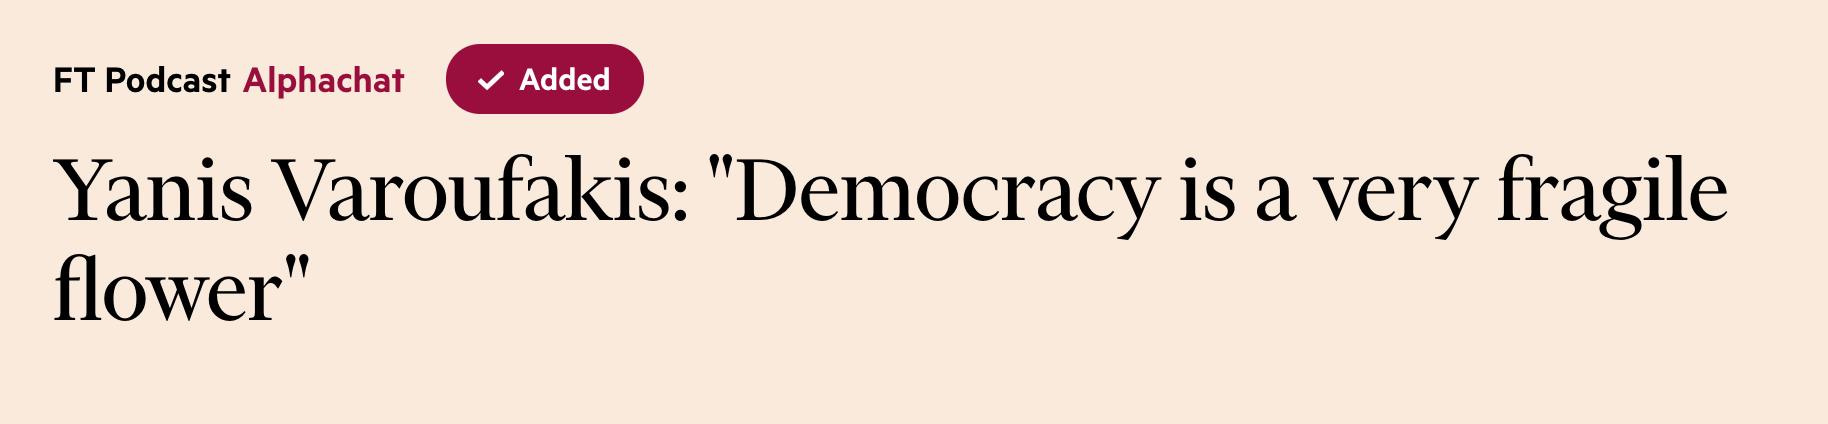 FT Alphachat 28 MAR 2019: On Democracy, Europe, the UK and Greece